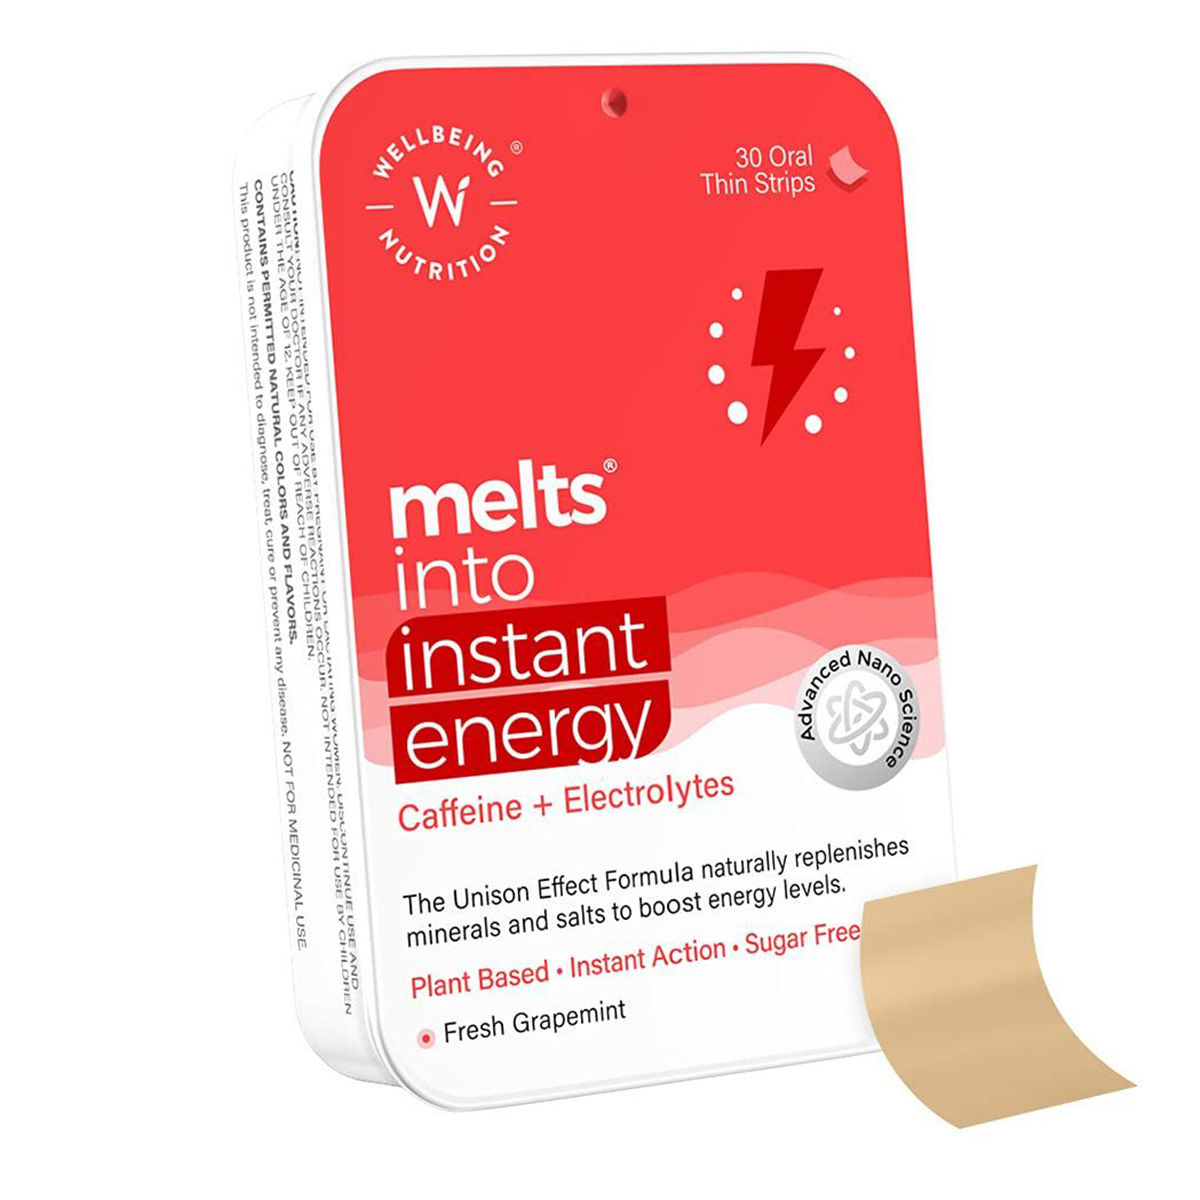 Buy Wellbeing Nutrition Melts Into Instant Energy Caffeine + Electrolytes Sugar Free, 30 Strips Online